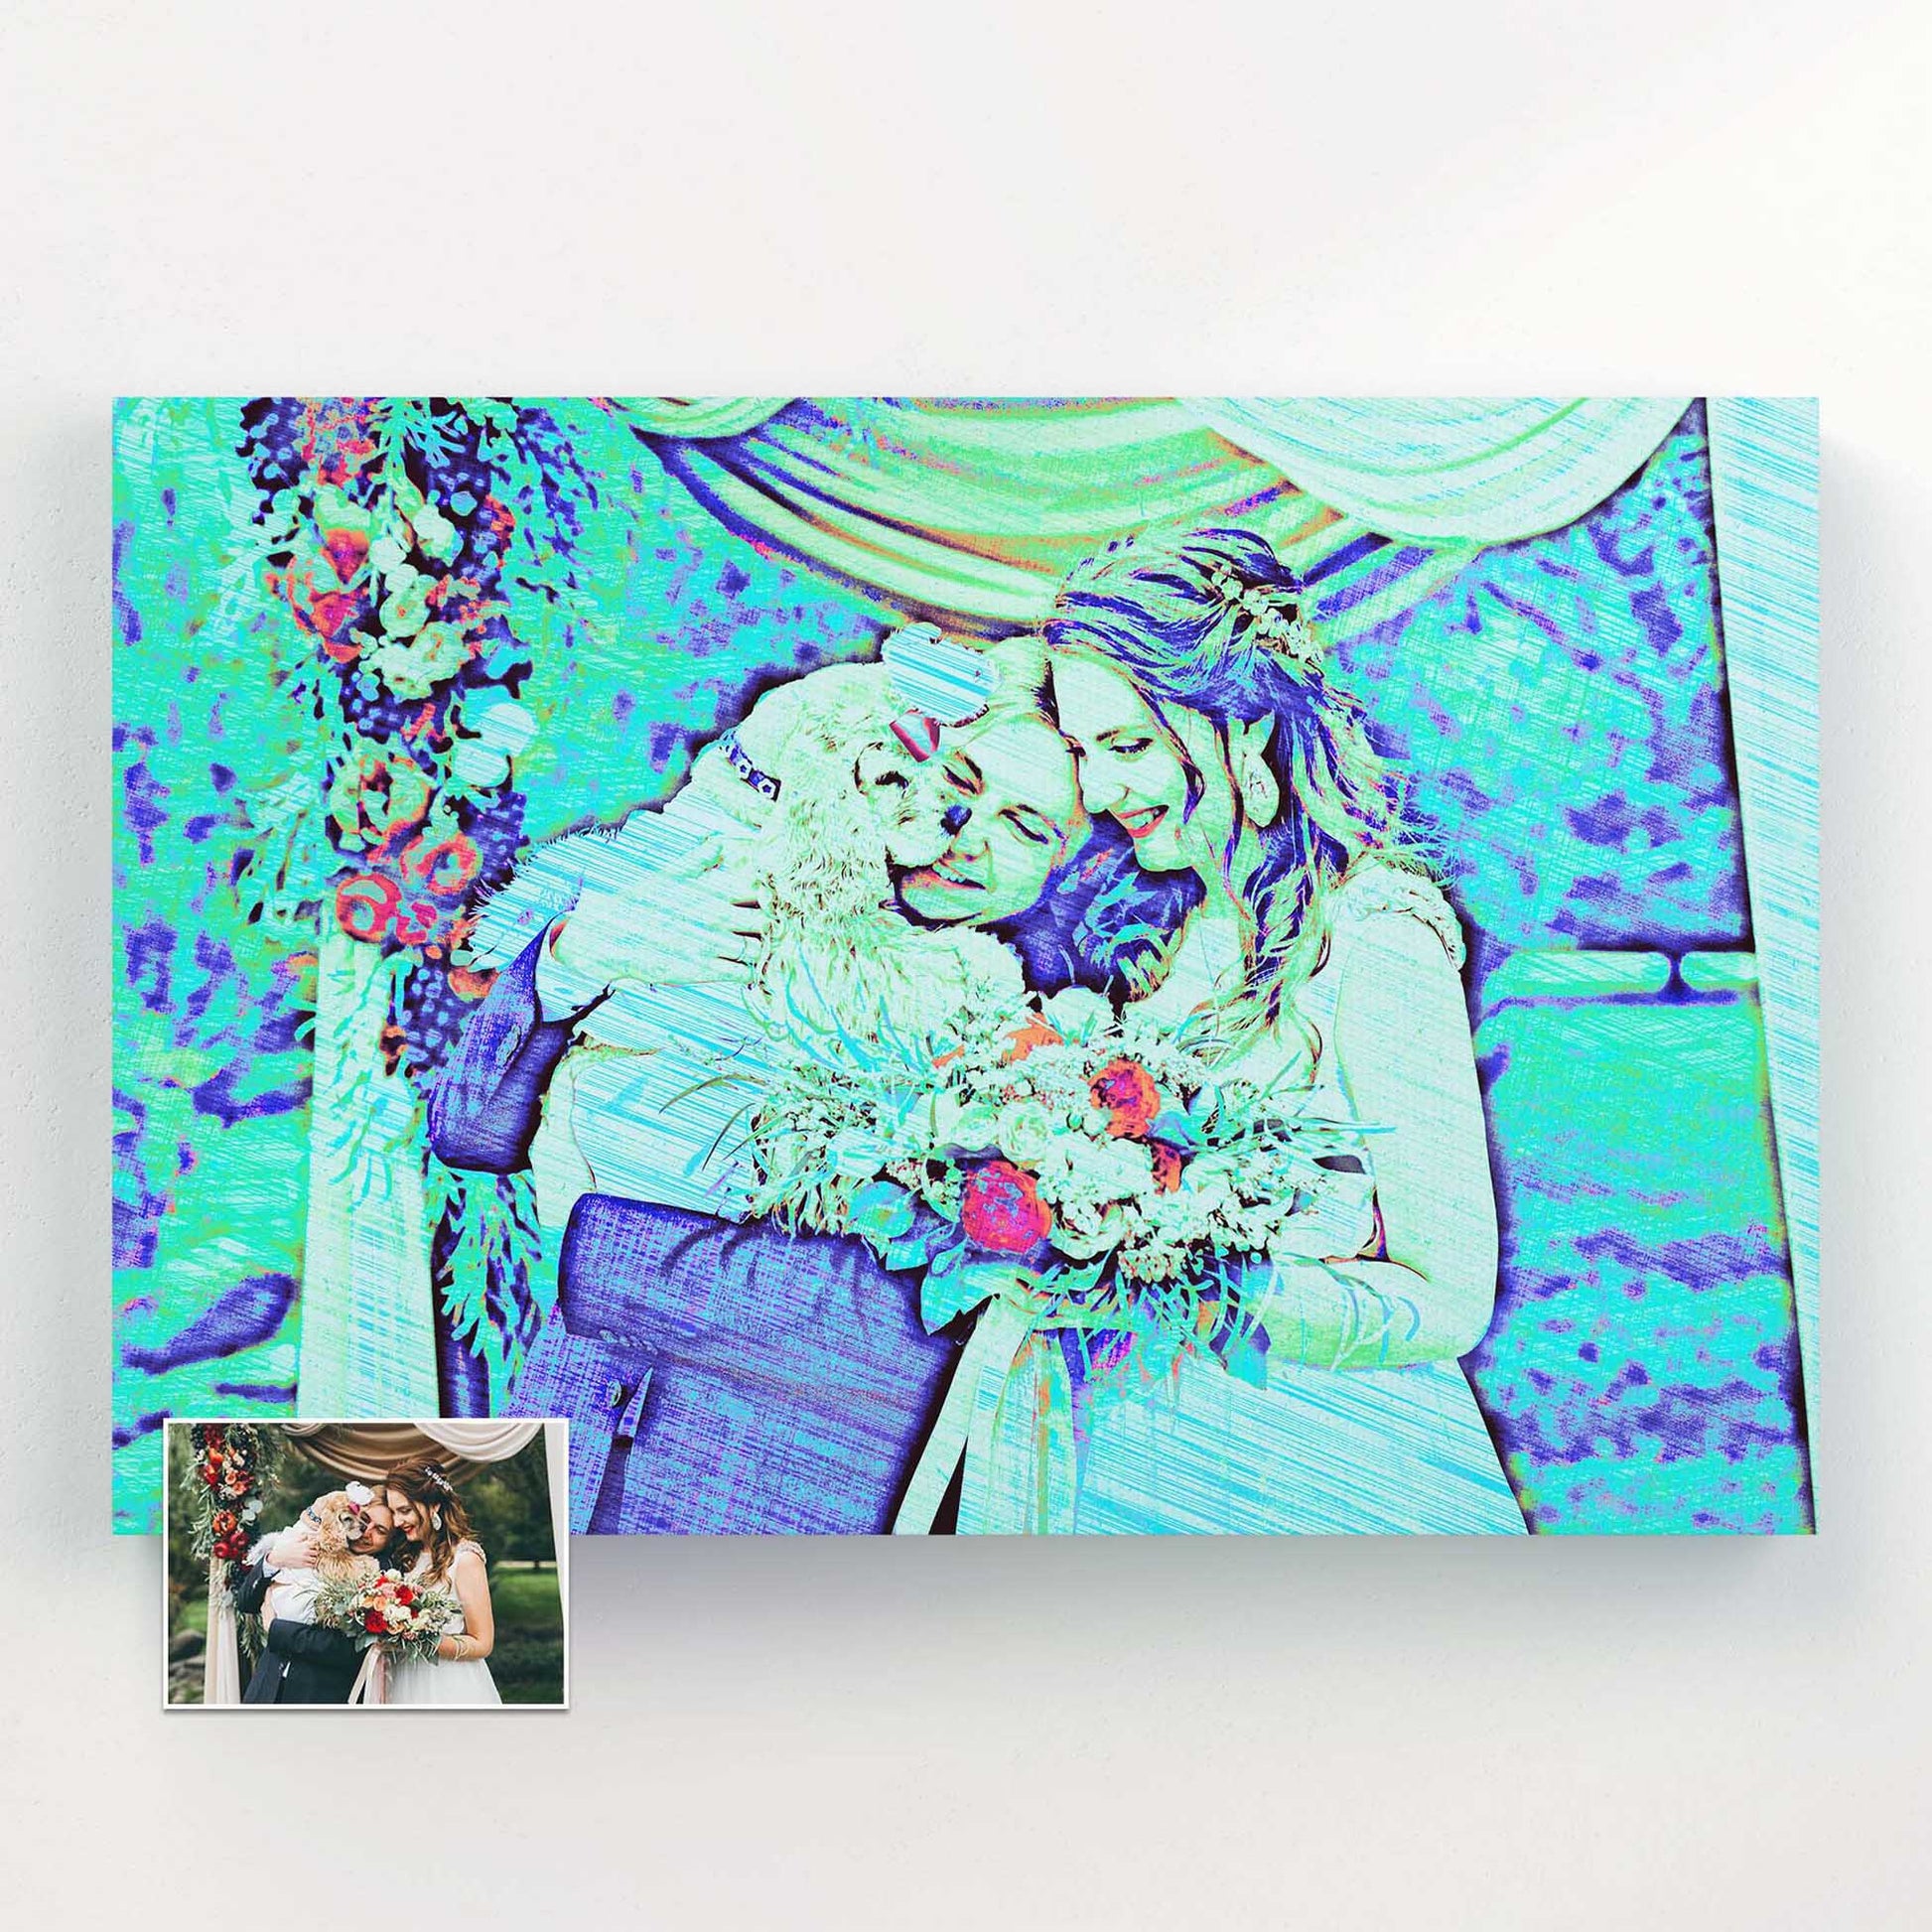 Express your artistic side with our Personalised Blue Drawing Canvas. This colorful and vibrant painting, created from your photo, is a unique and original way to showcase your creativity. Printed on handmade canvas